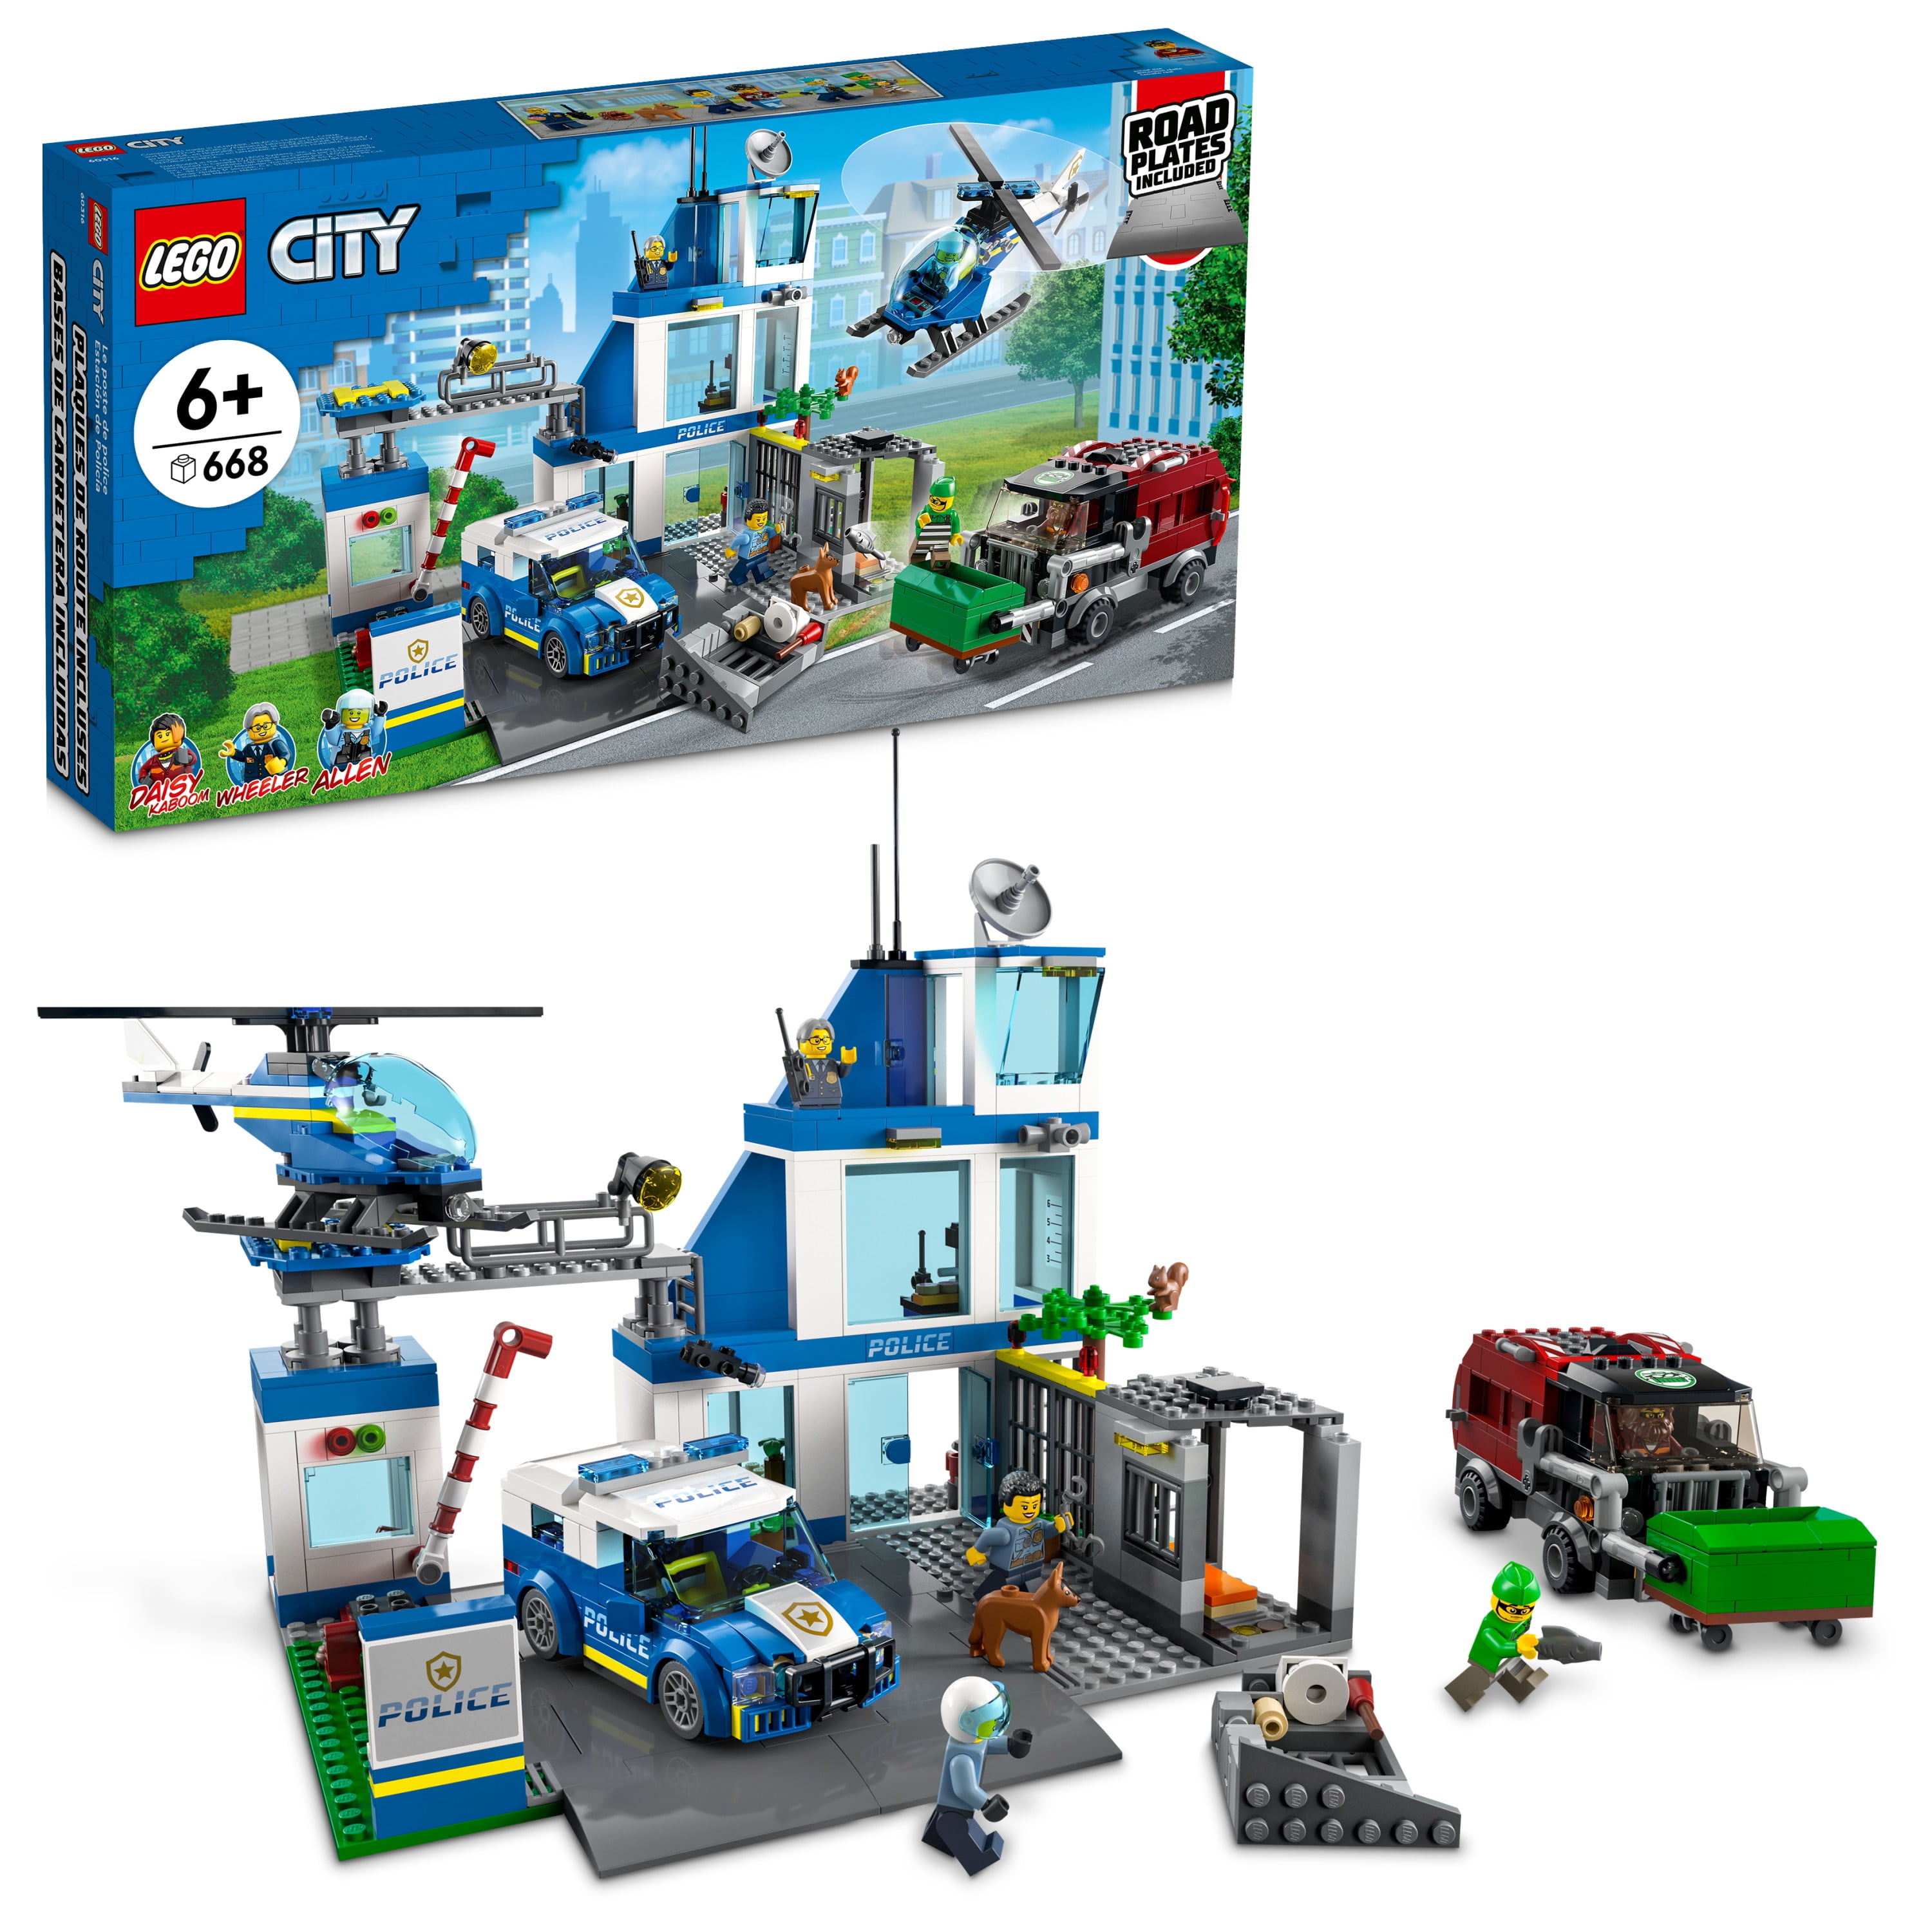 collegegeld toon snelweg LEGO City Police Station with Van, Garbage Truck & Helicopter Toy 60316,  Gifts for 6 Plus Year Old Kids, Boys & Girls with 5 Minifigures and Dog Toy  - Walmart.com